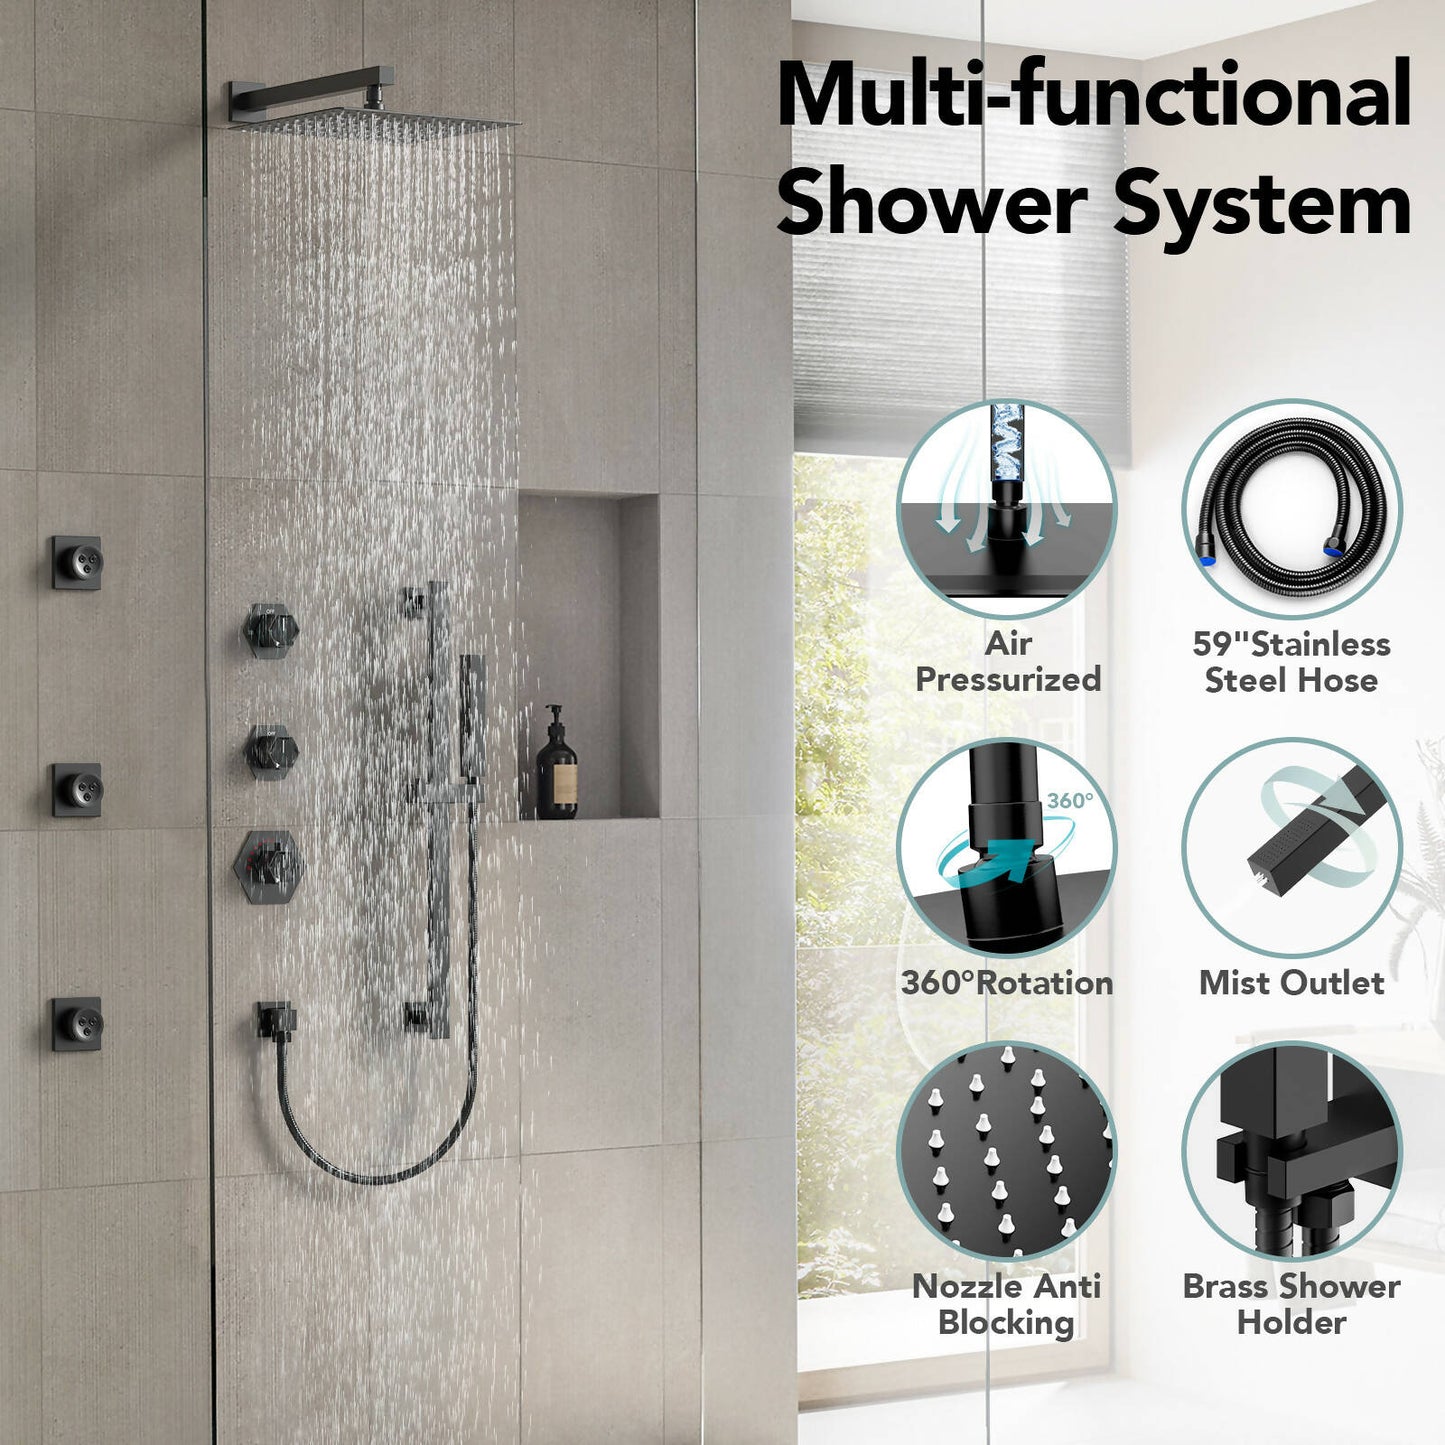 RelaxaJet 12" High-Pressure 3 Function Rainfall Shower Faucet, Wall Mount, Rough in-Valve, 2.5 GPM